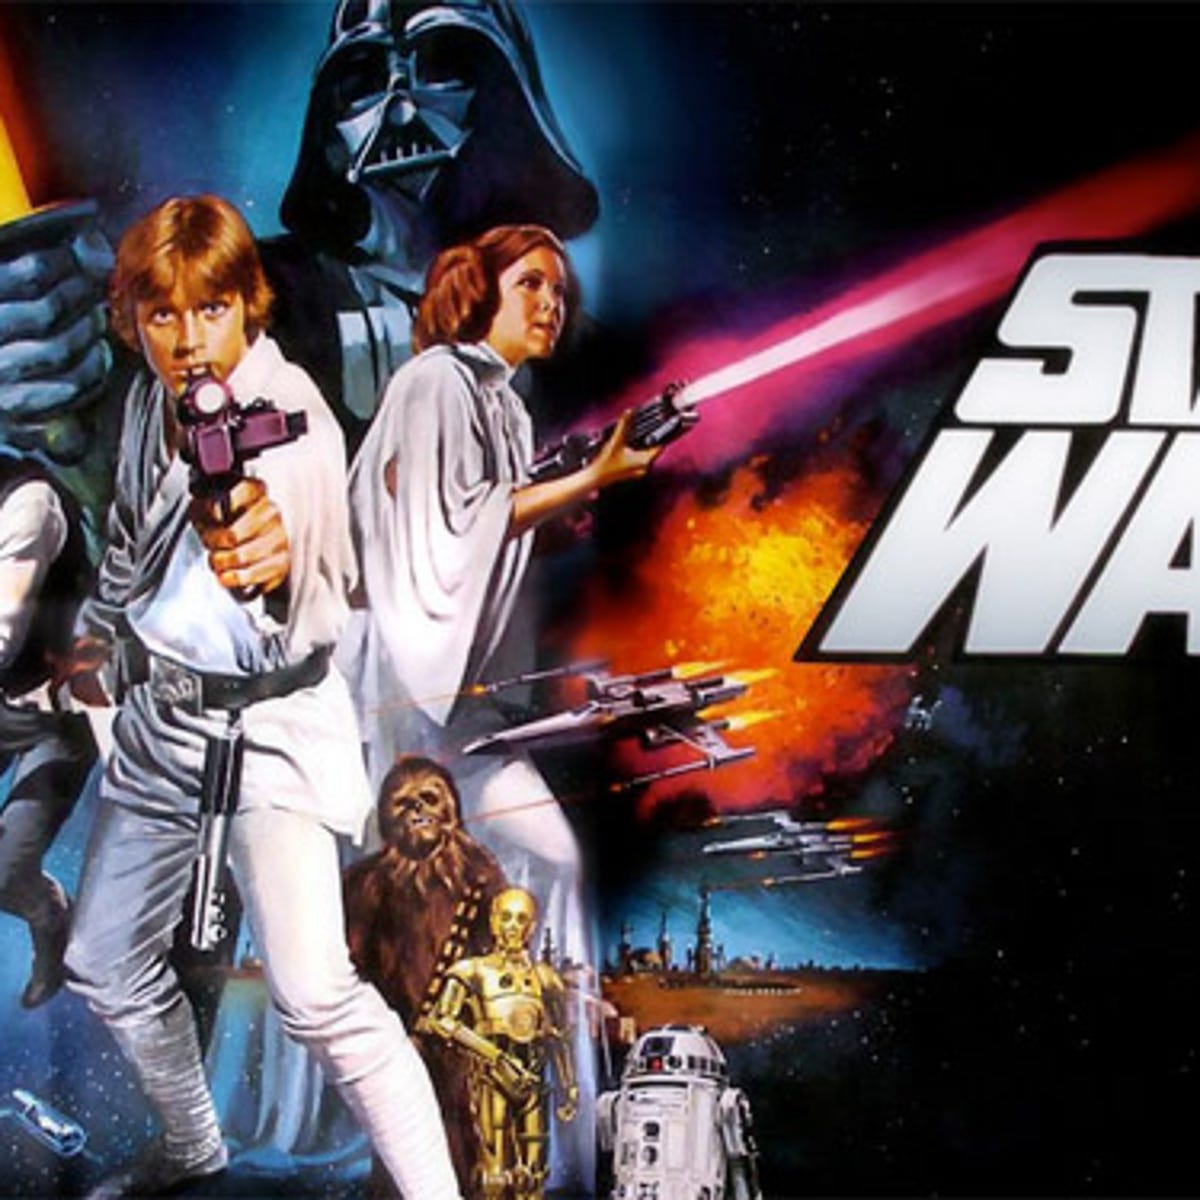 Why watching the original 'Star Wars' again was a bad idea - CNET